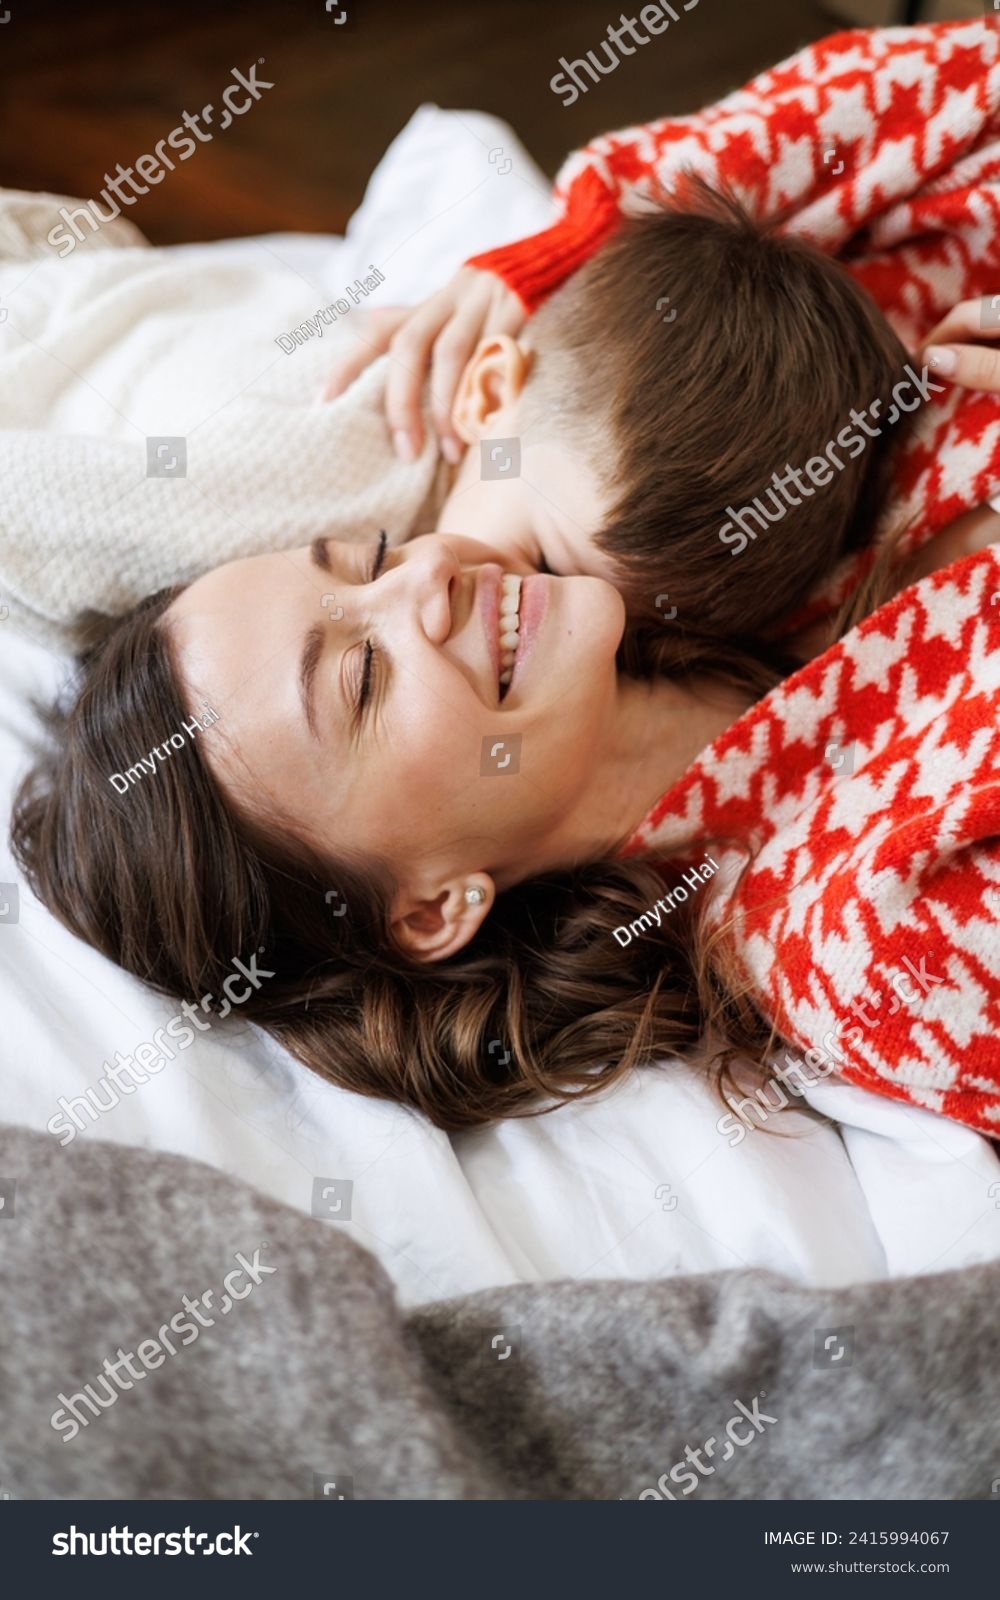 Toddler boy in sweater kissing happy mother on bed #2415994067